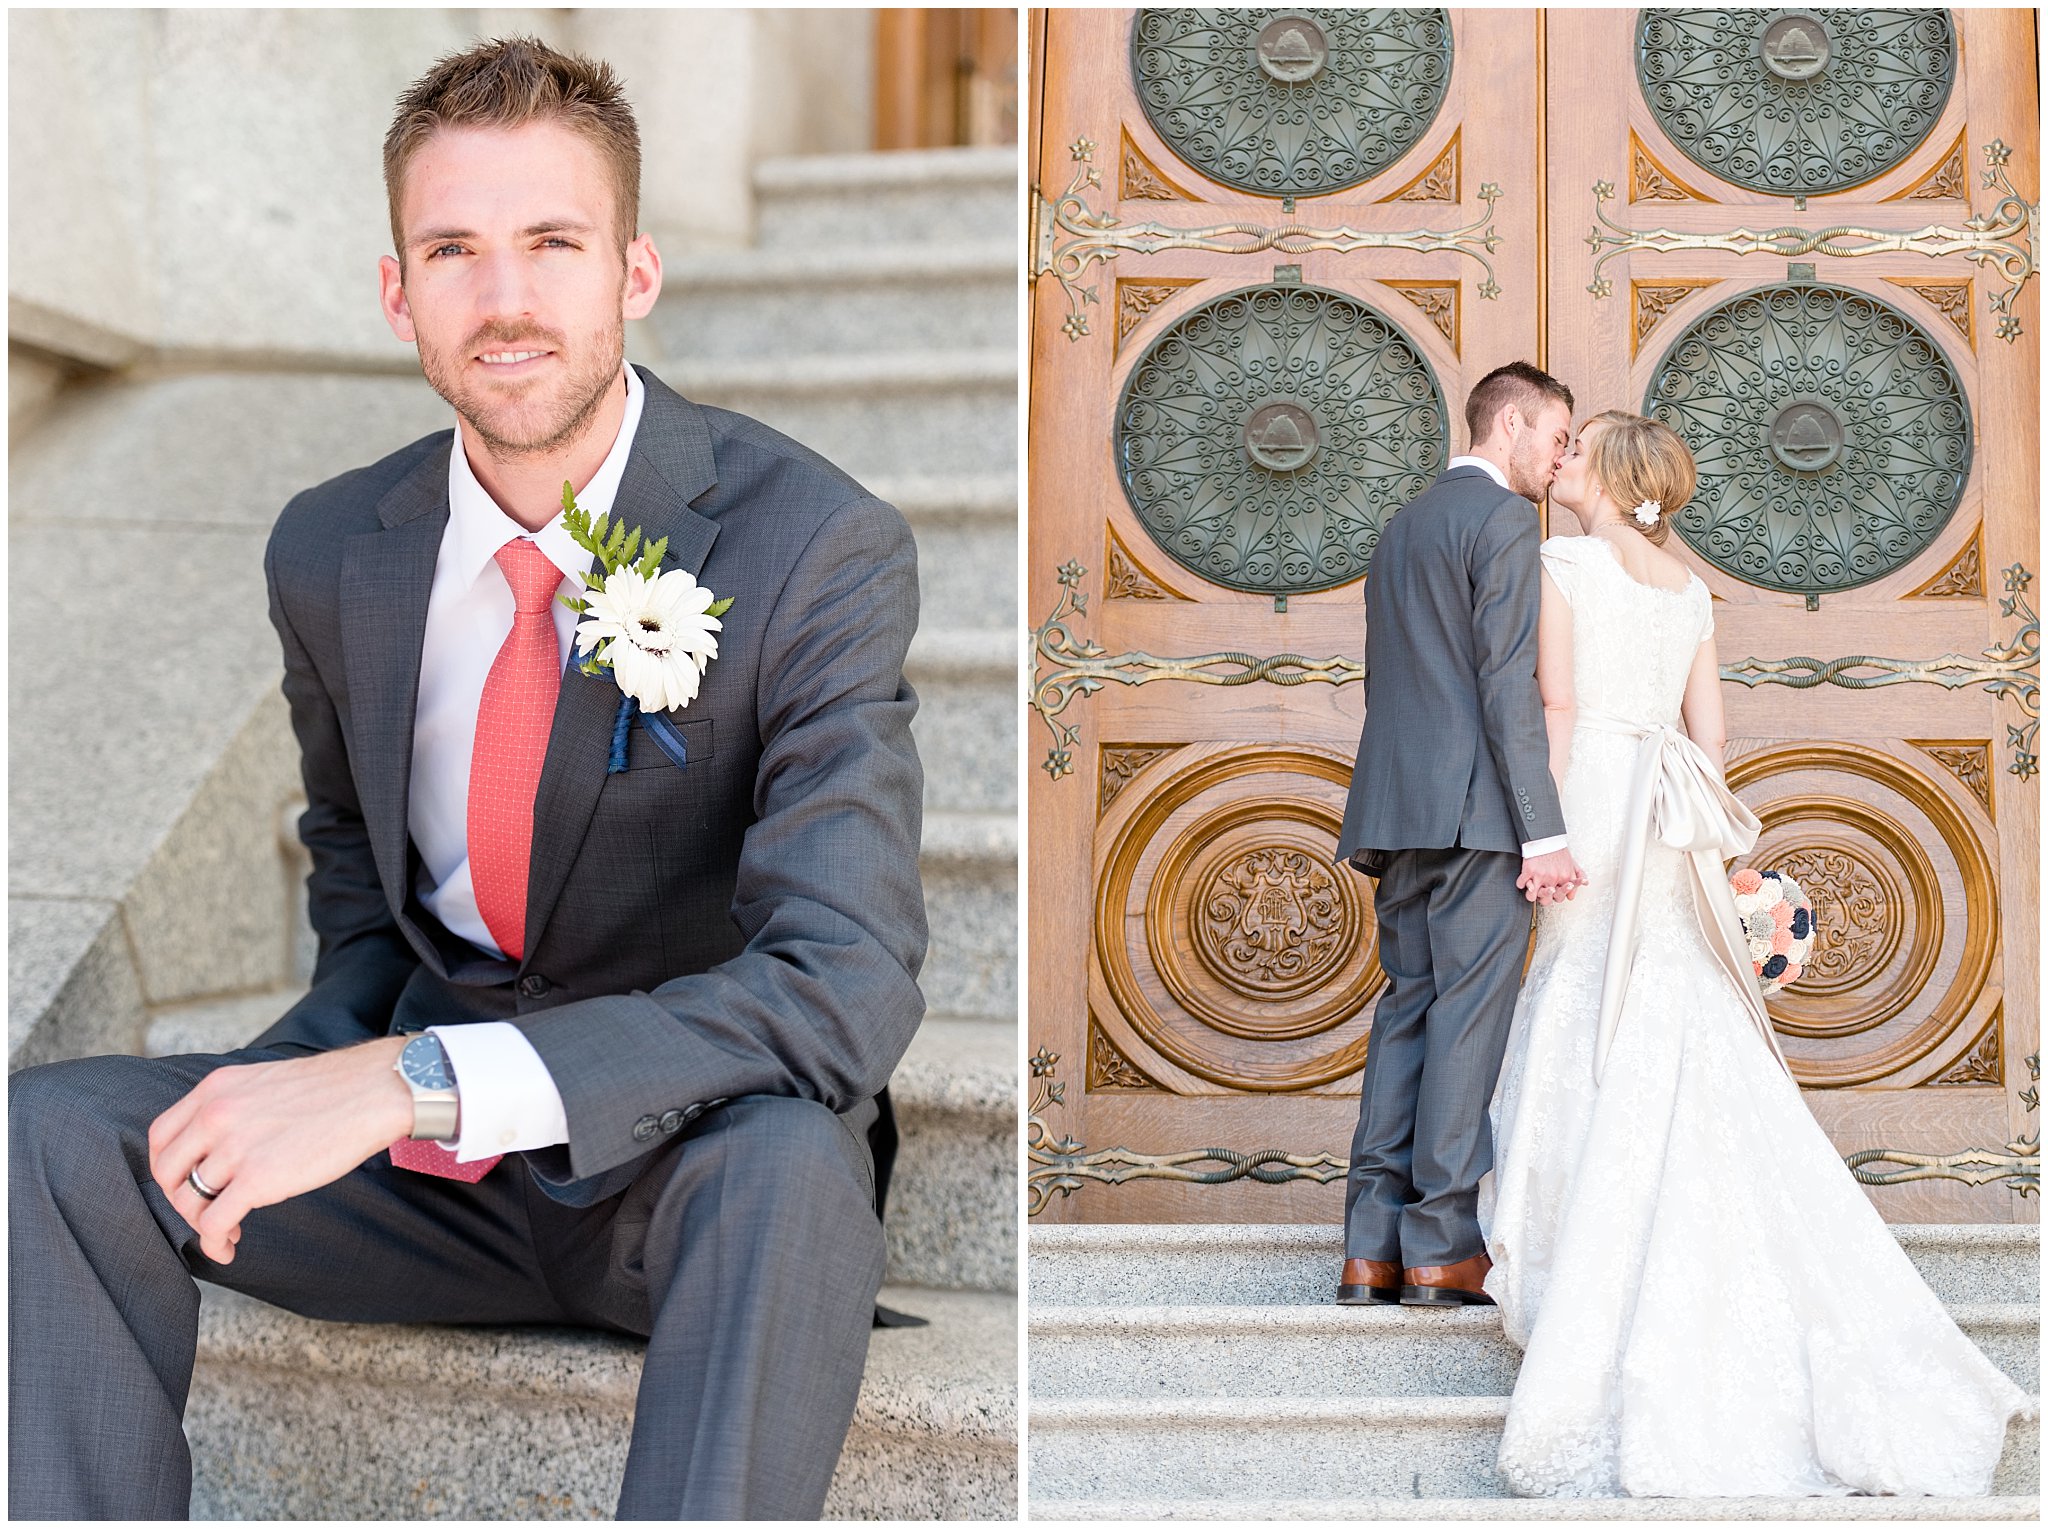 Salt Lake Temple spring wedding | Coral and grey wedding | Bride and groom pictures on the stairs